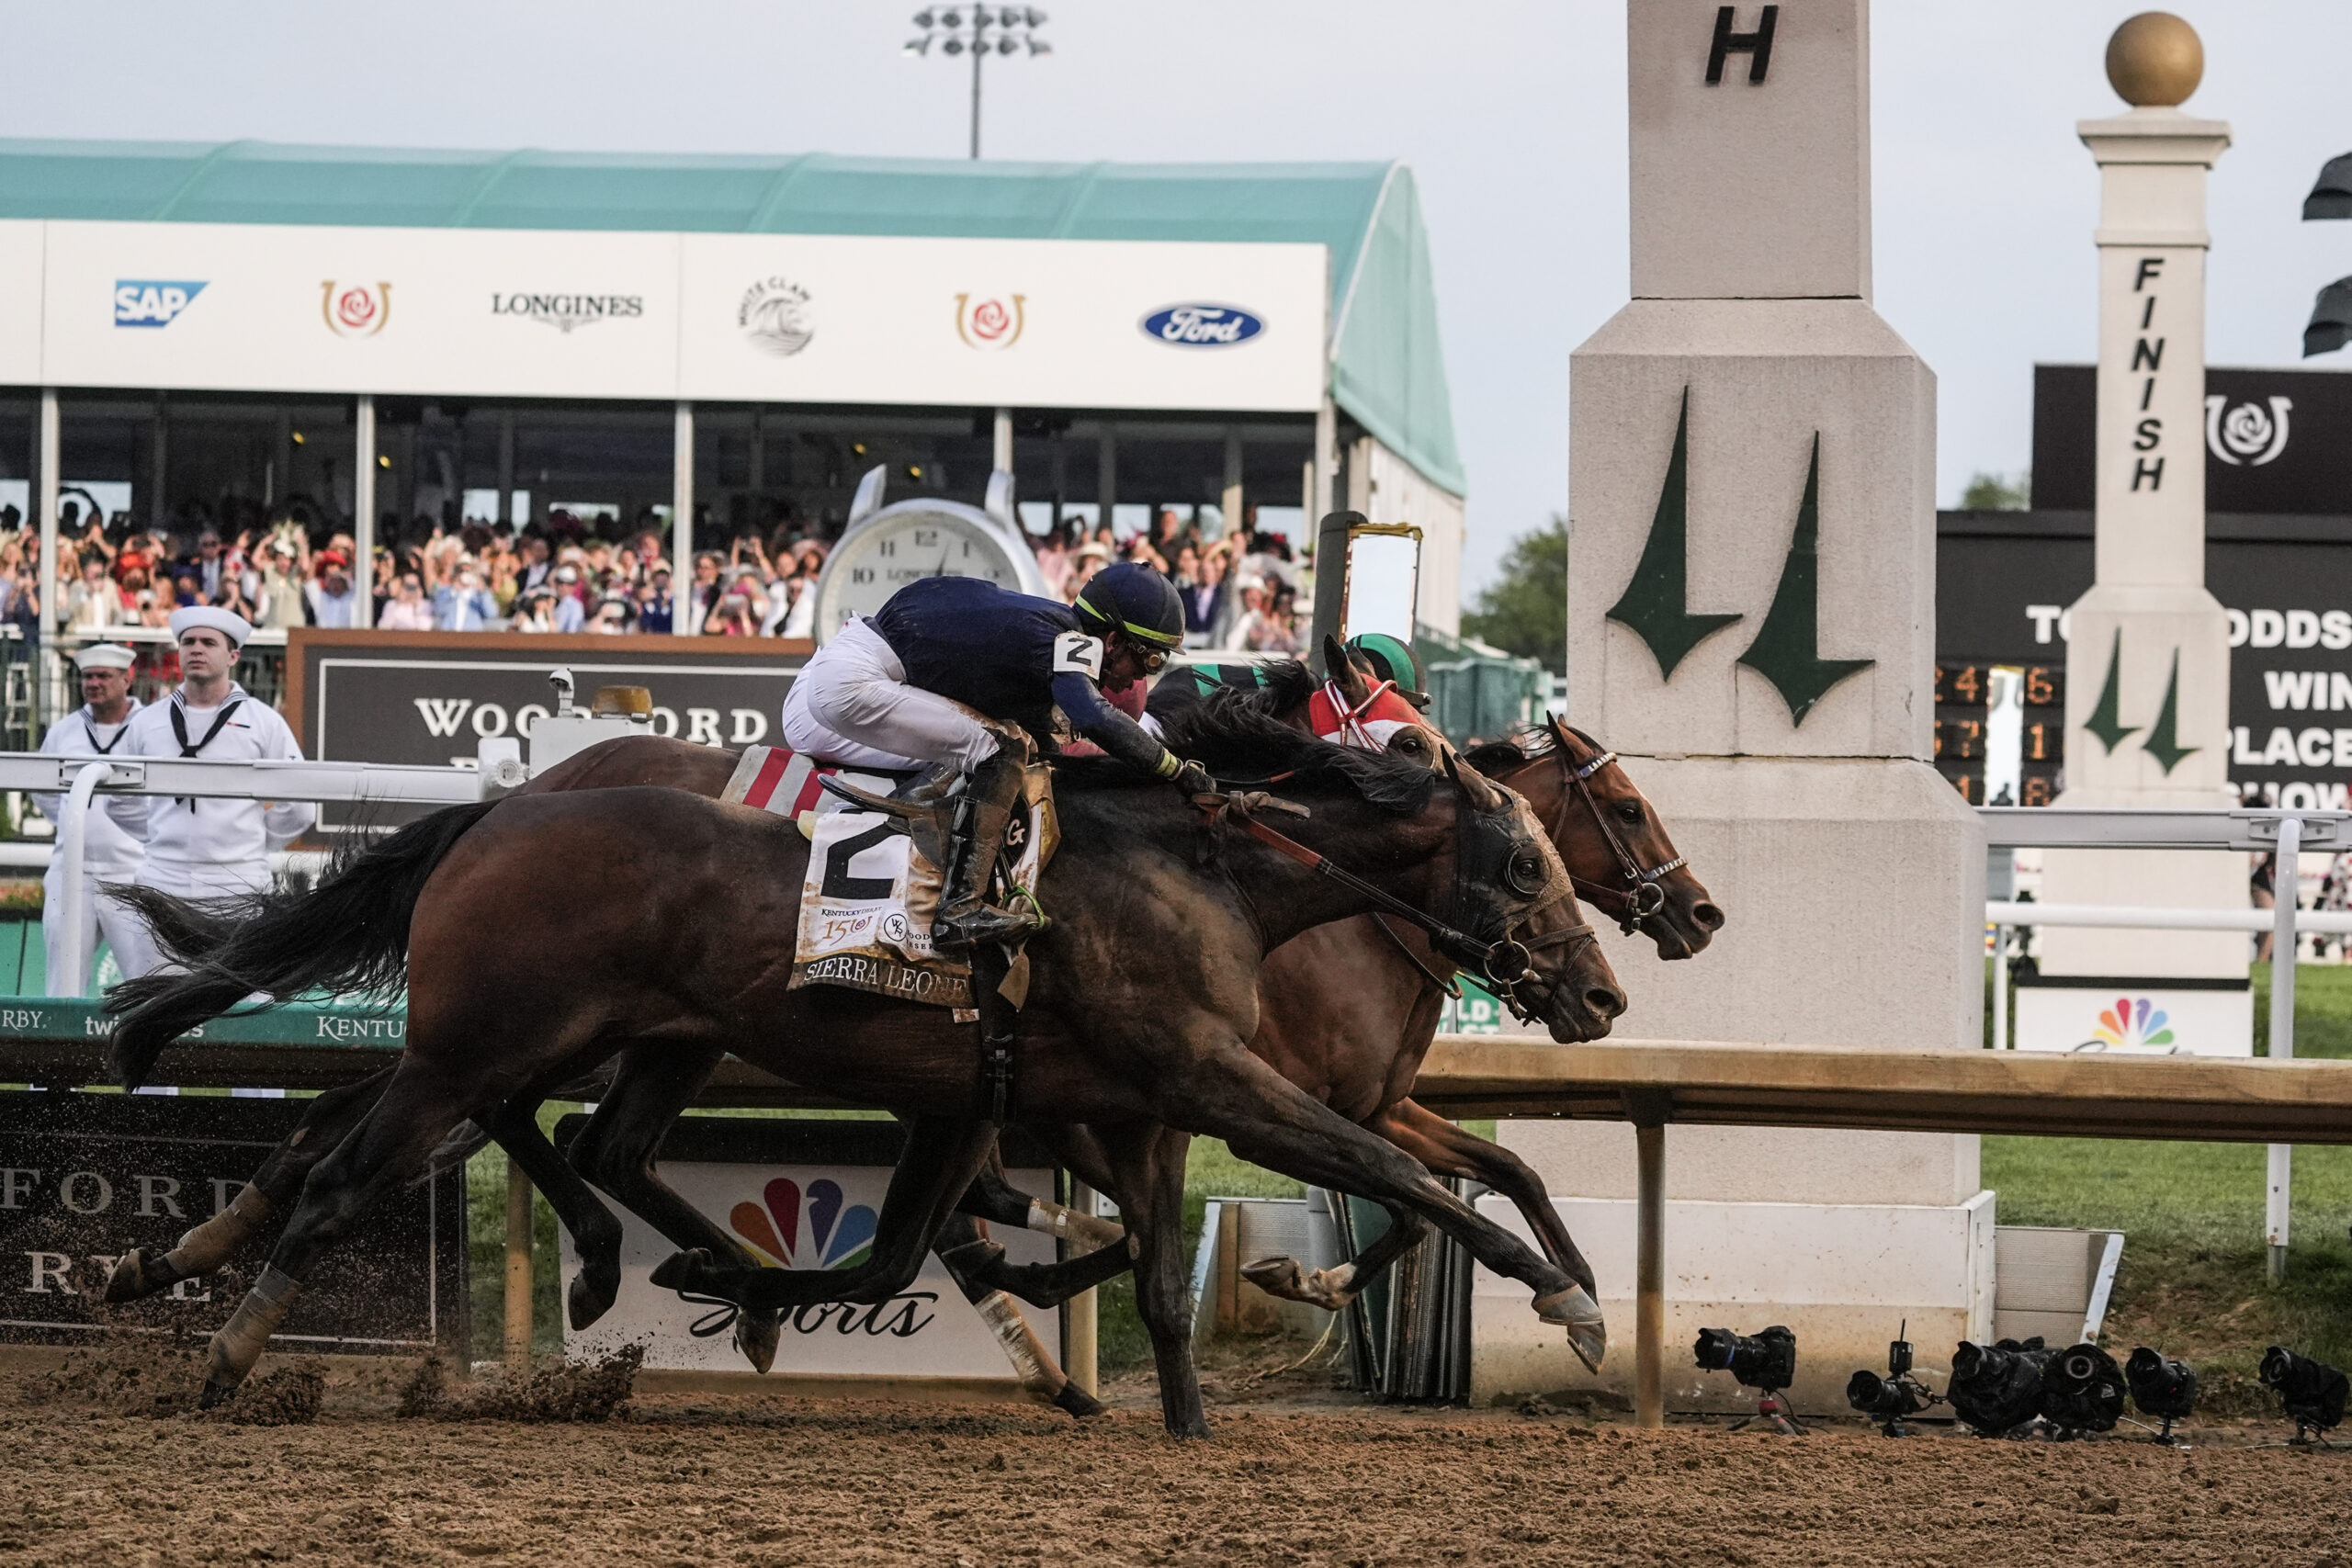 Mystik Dan wins 150th Kentucky Derby by a nose in a 3-horse photo finish, edging out Forever Young ...